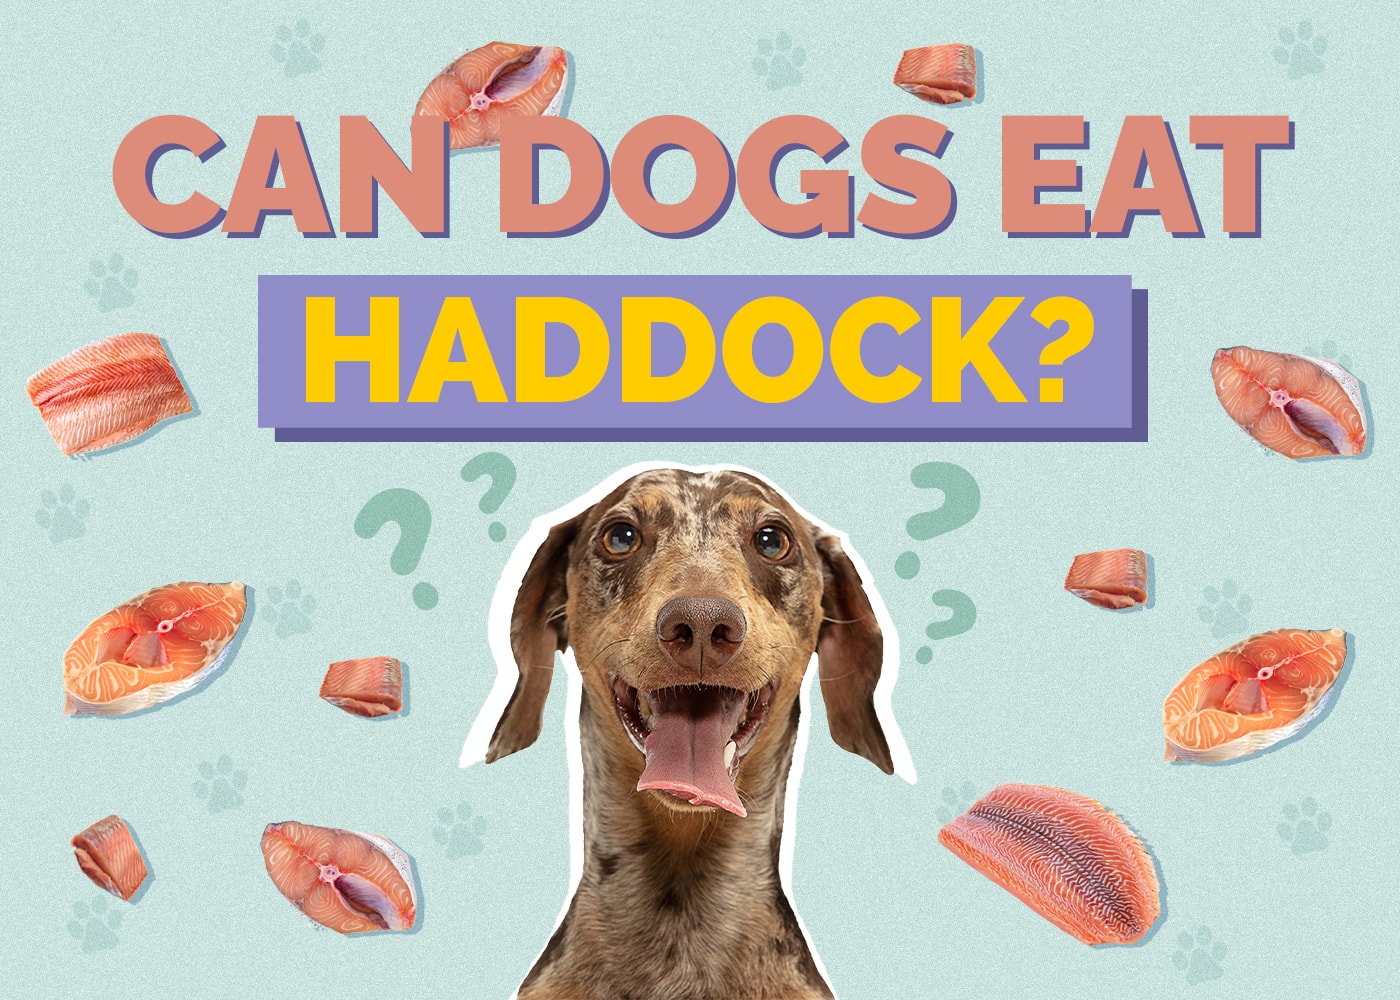 Can Dogs Eat Haddock